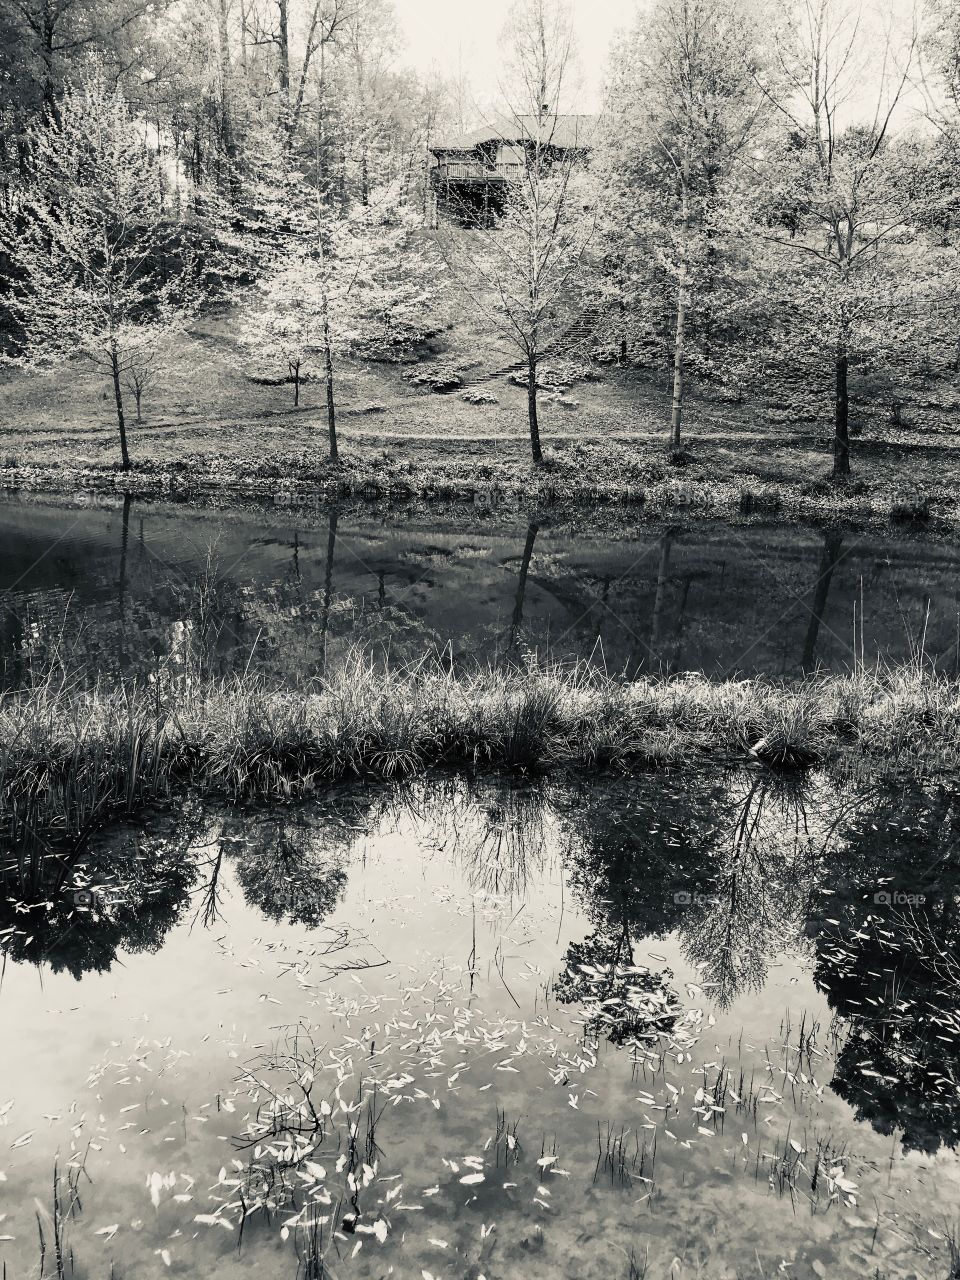 Black and white reflecting pond with trees